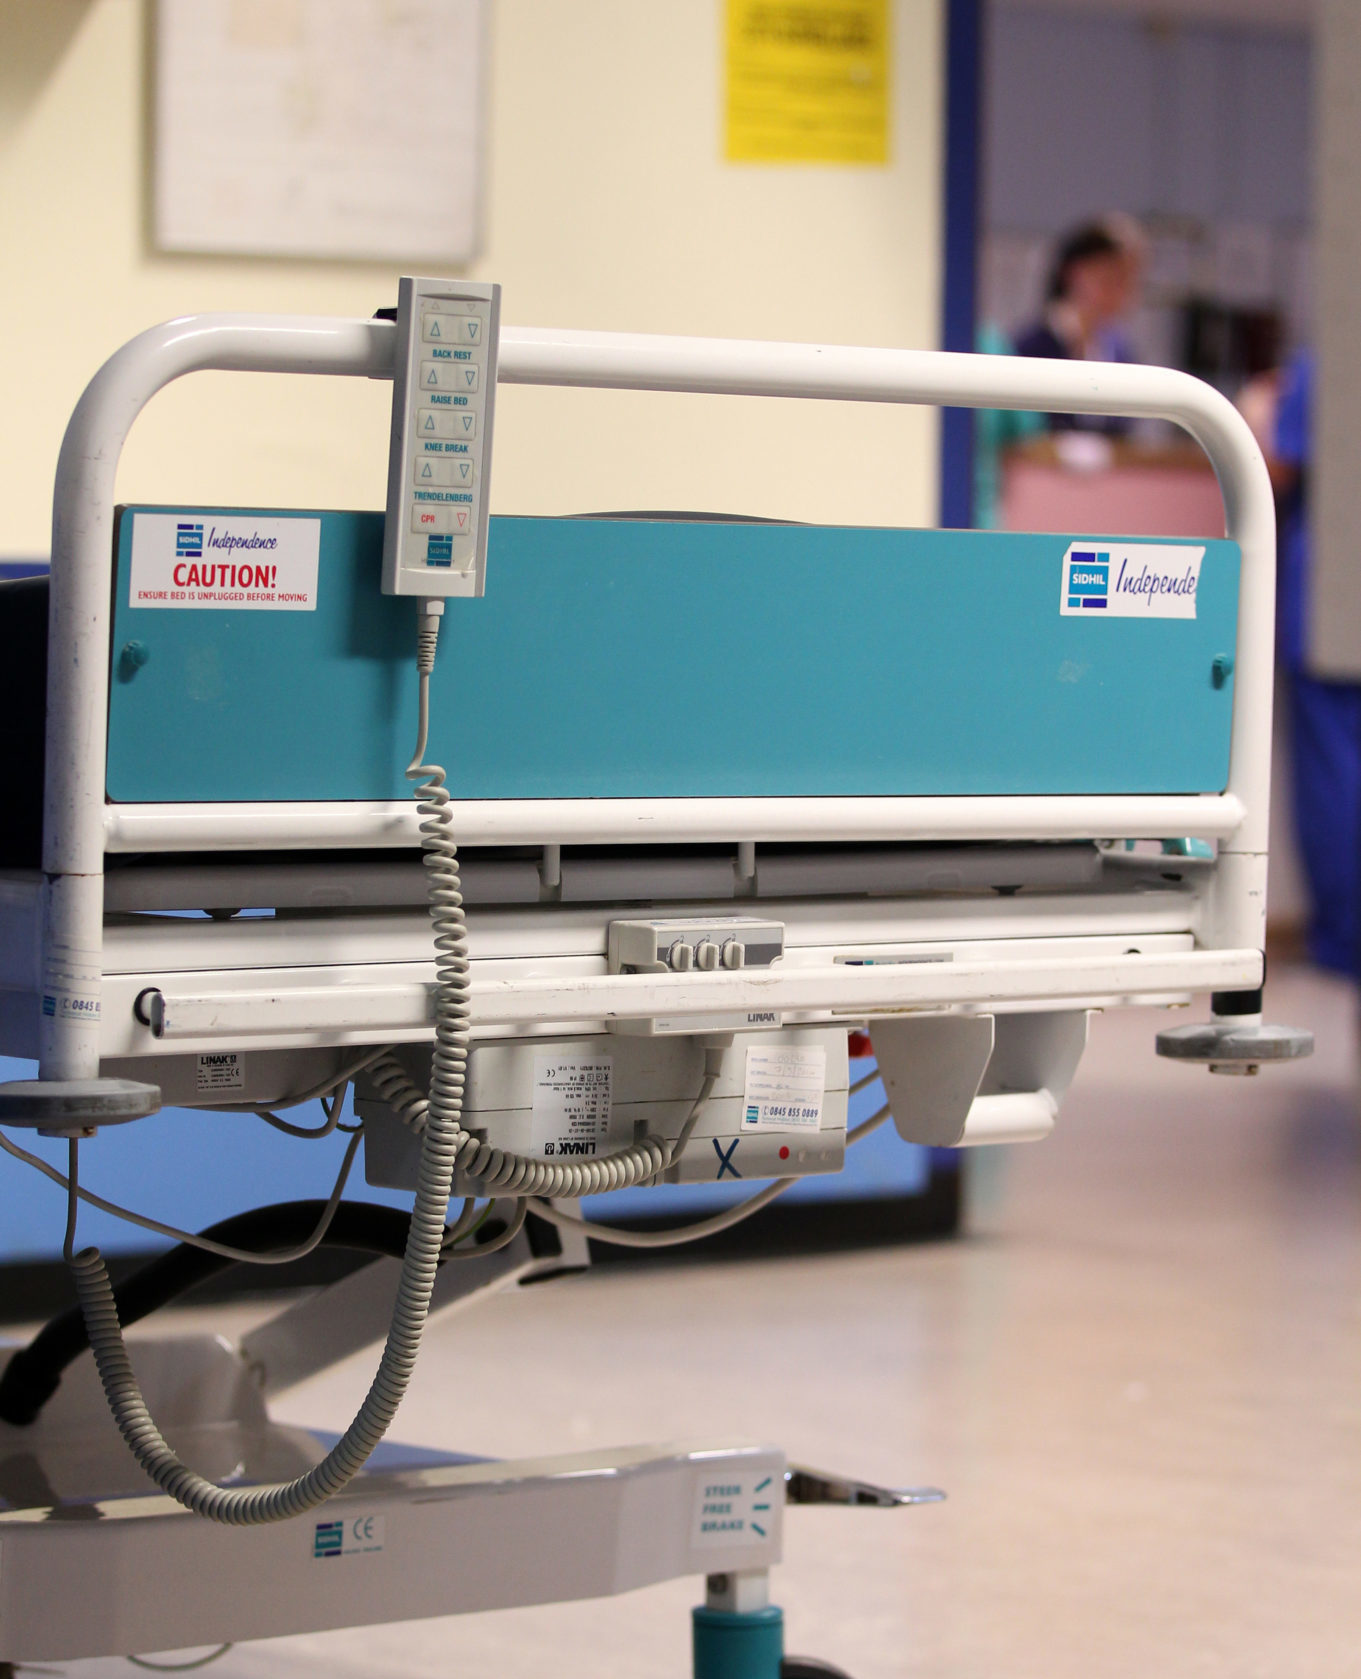 A bed at is seen at a hospital in Liverpool, England in 2014.